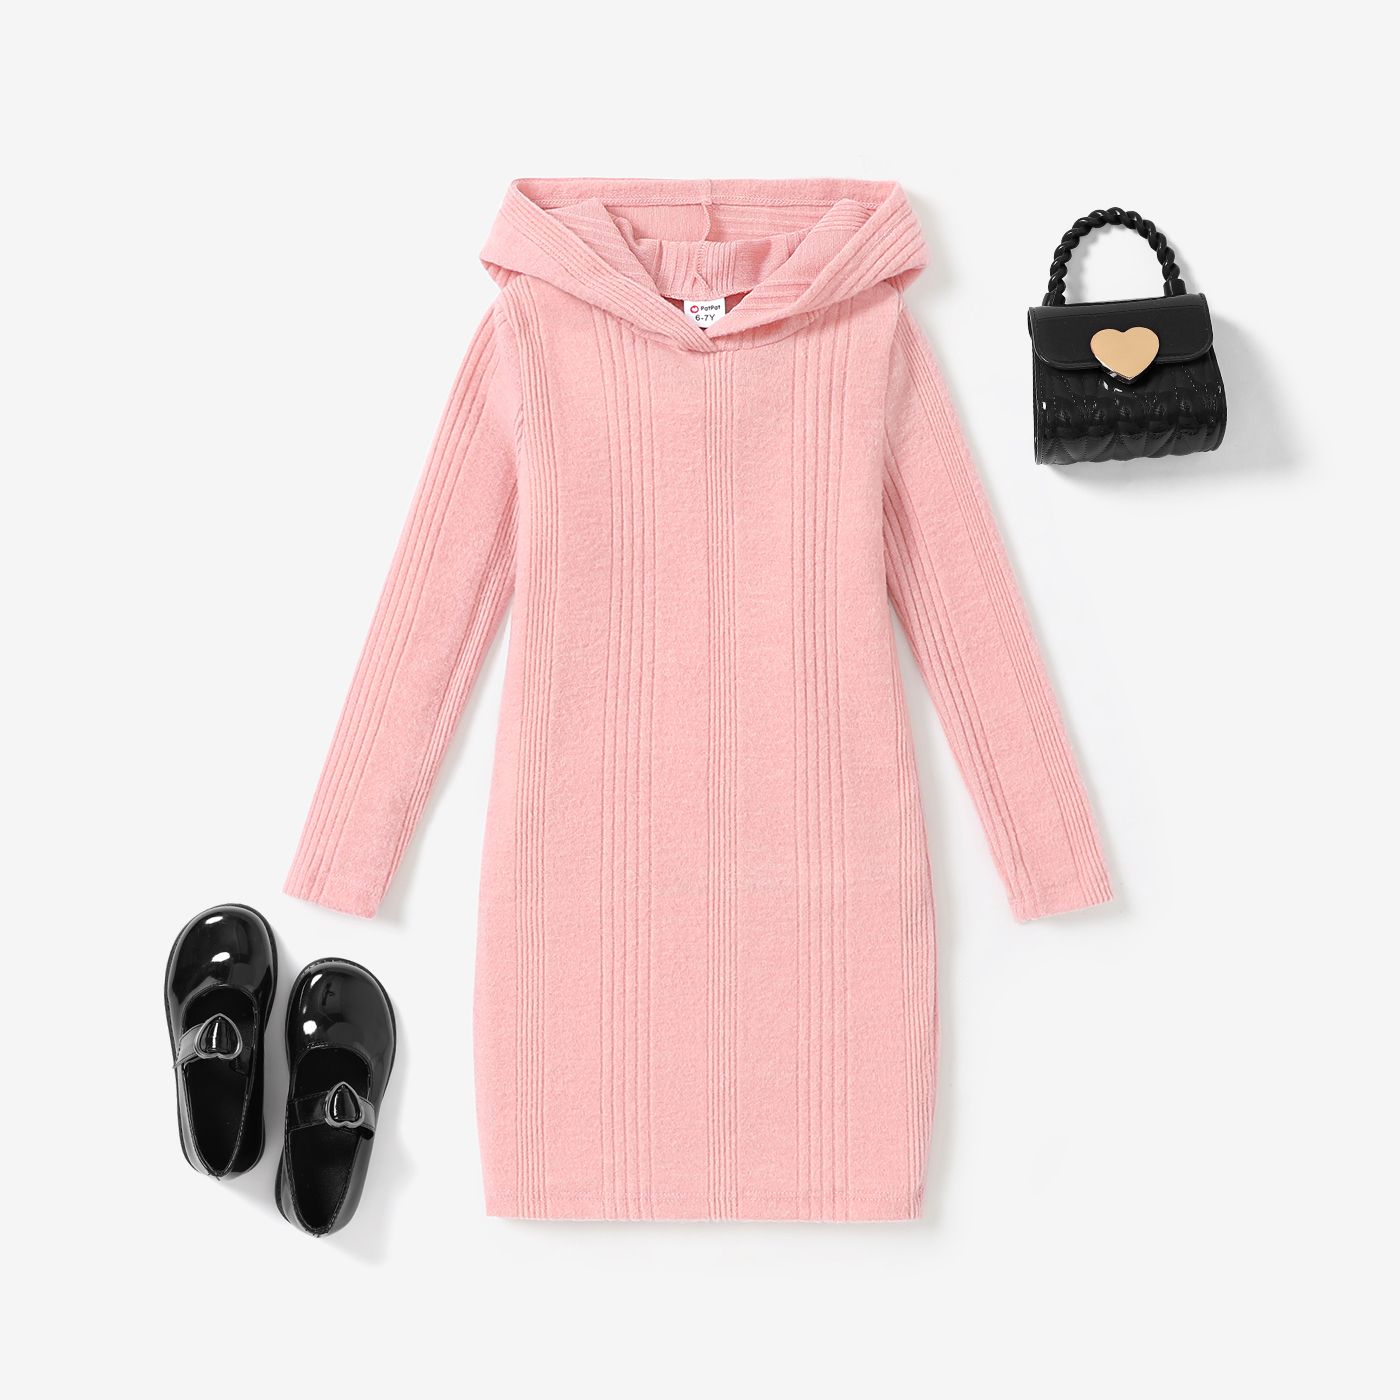 Kid Girl's Basic Textured Material Hooded Dress In Solid Color